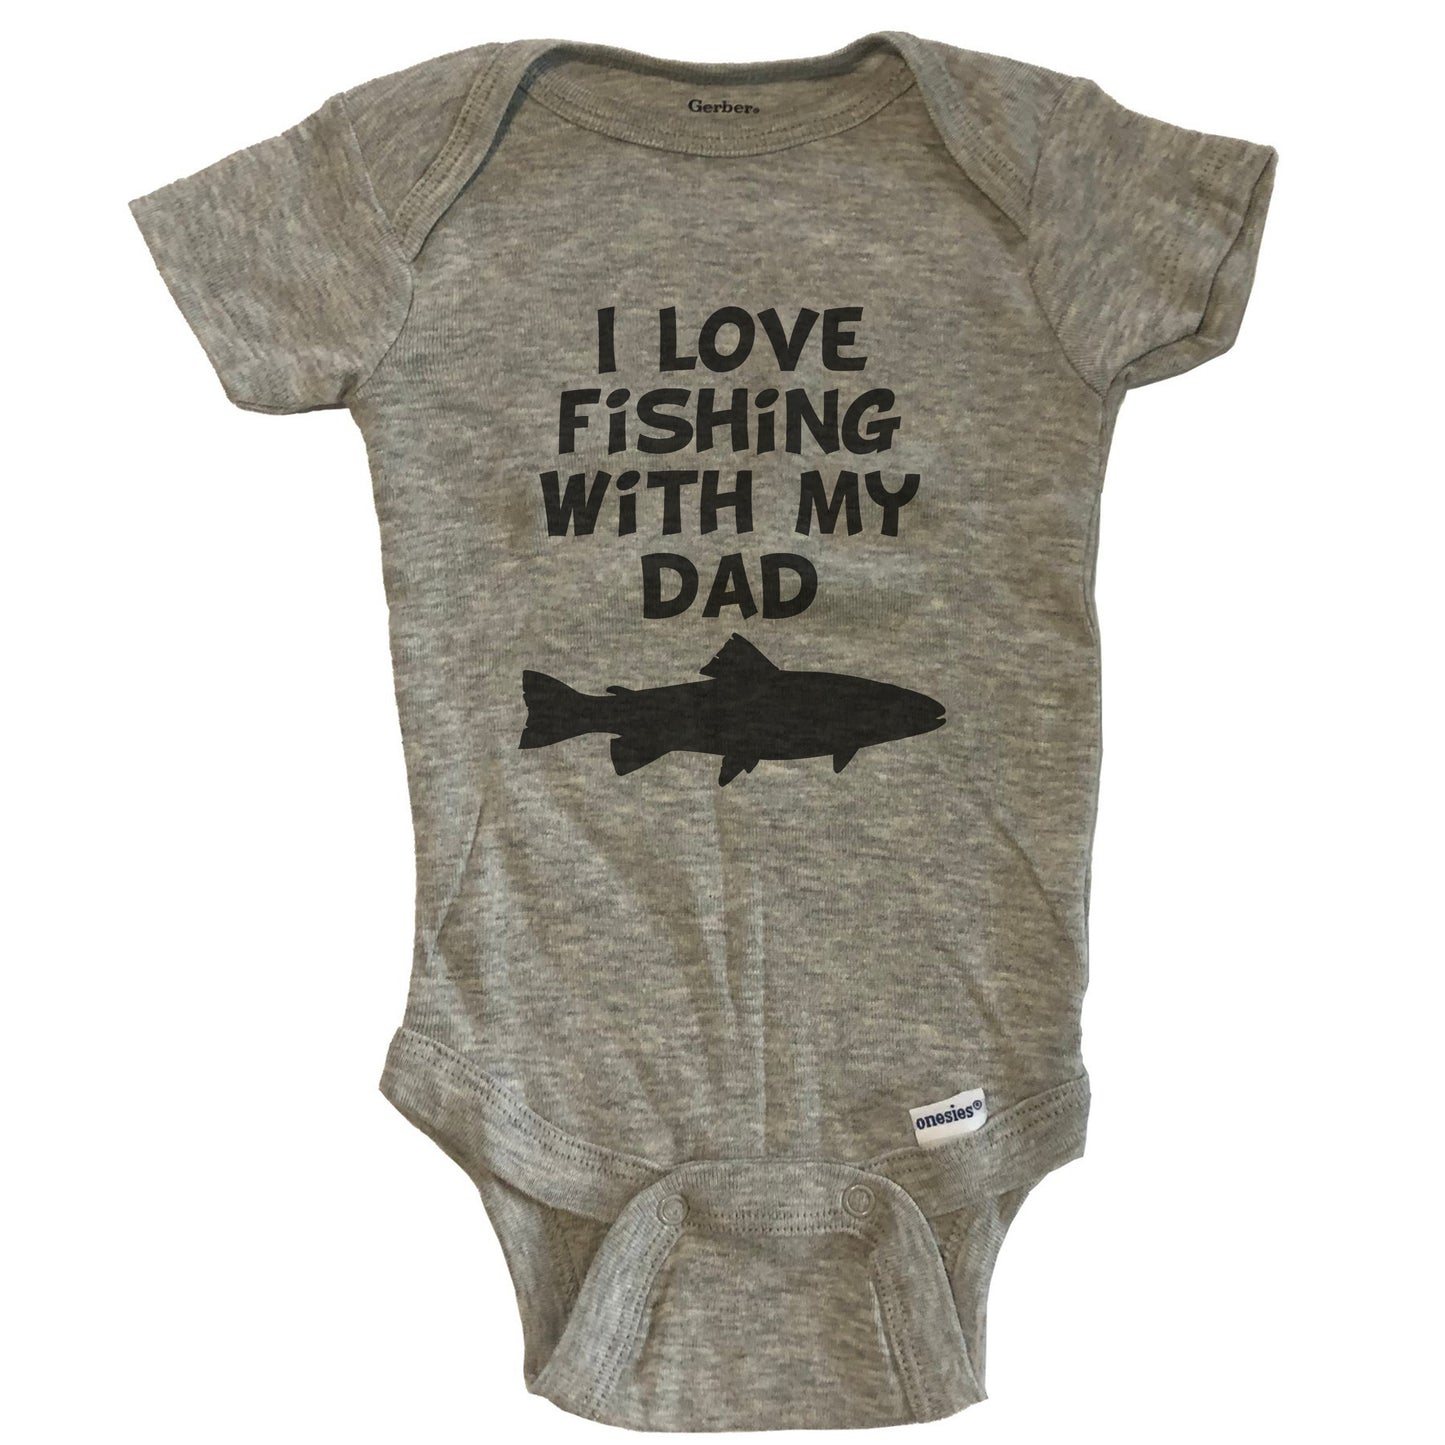 I Love Fishing with My Dad Baby Onesie 6-9 Months / Grey